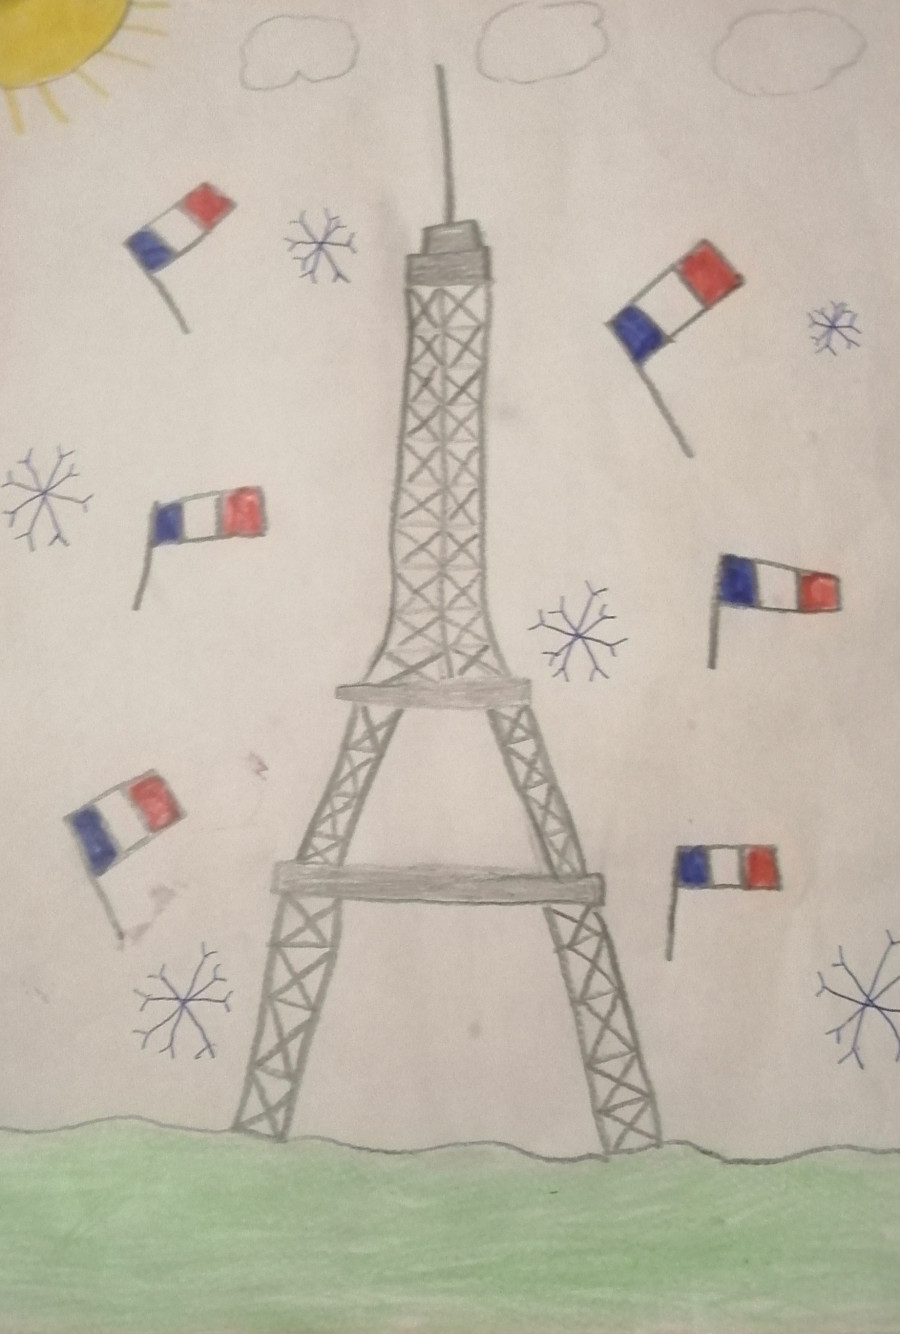 'The Eiffle Tower' by Fiona (9) from Galway